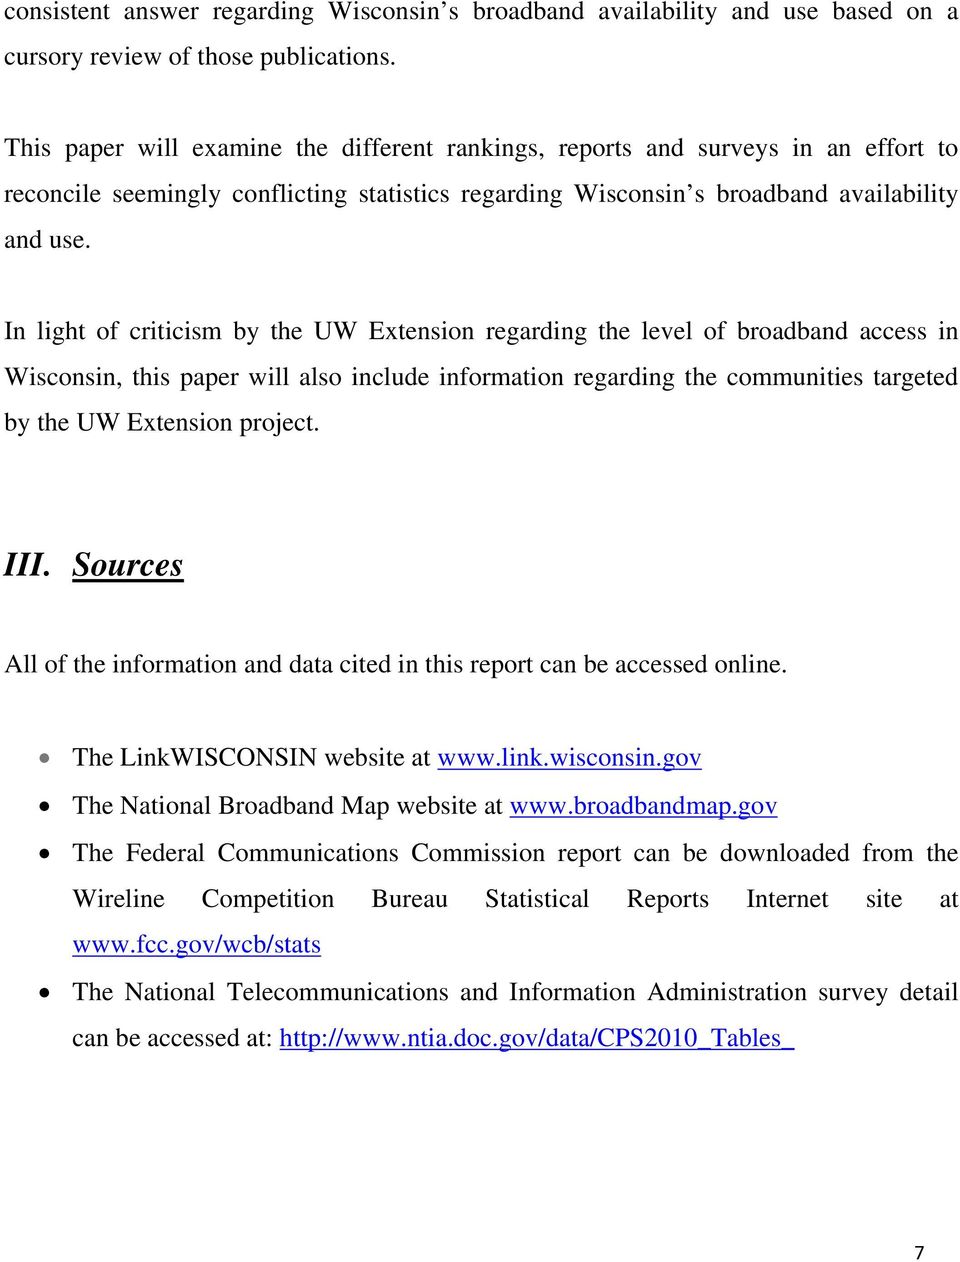 In light of criticism by the UW Extension regarding the level of broadband access in Wisconsin, this paper will also include information regarding the communities targeted by the UW Extension project.